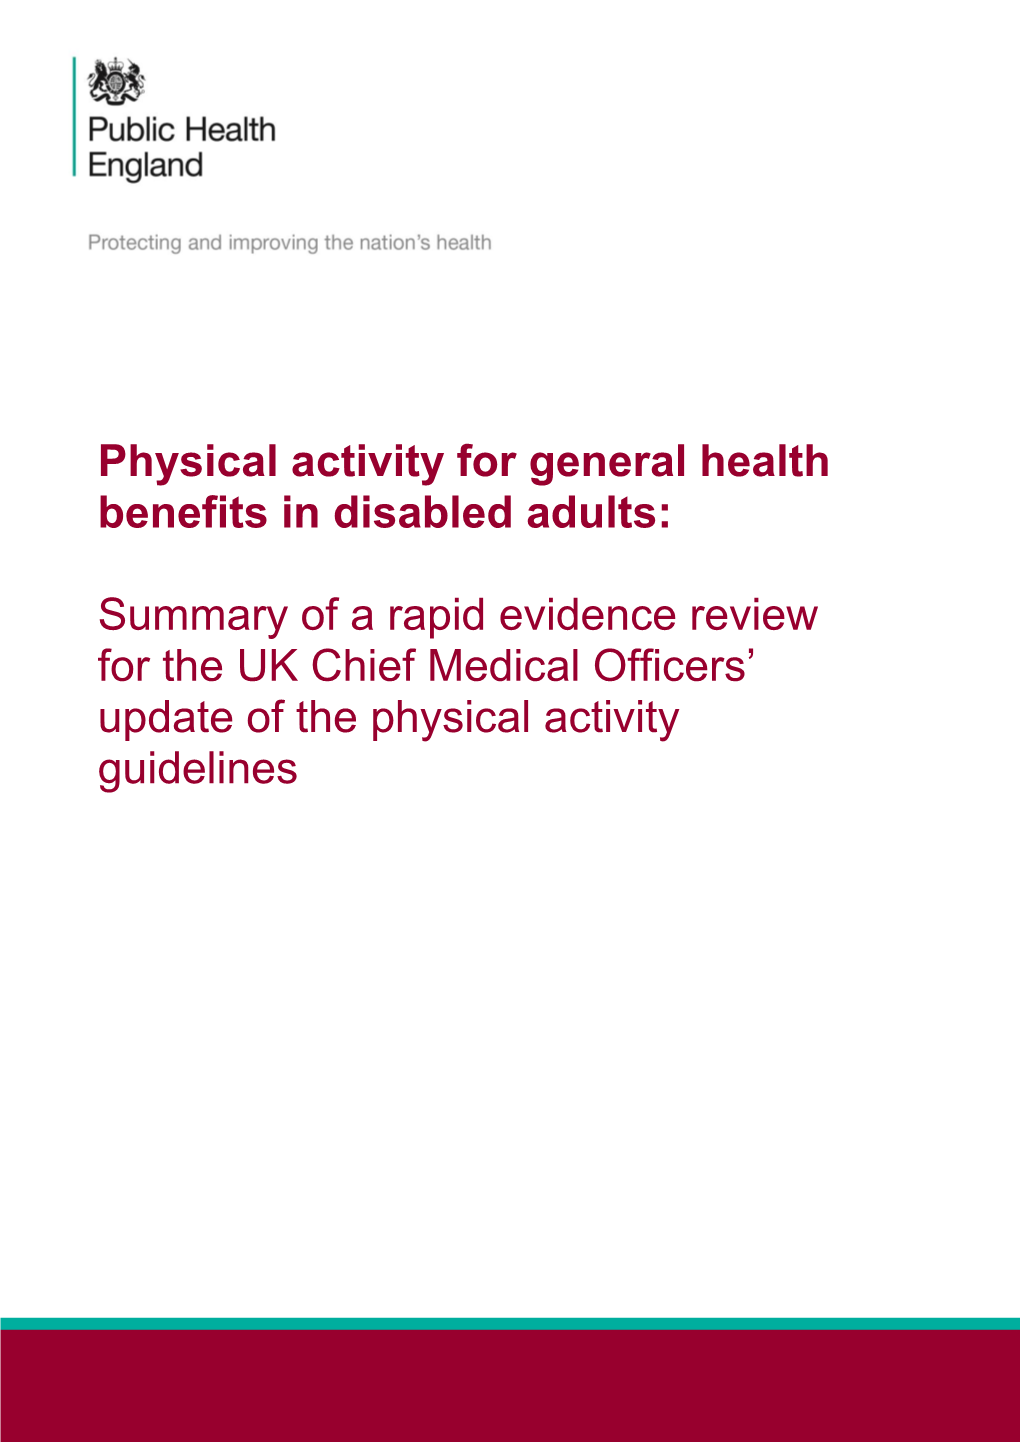 Physical Activity for General Health Benefits in Disabled Adults